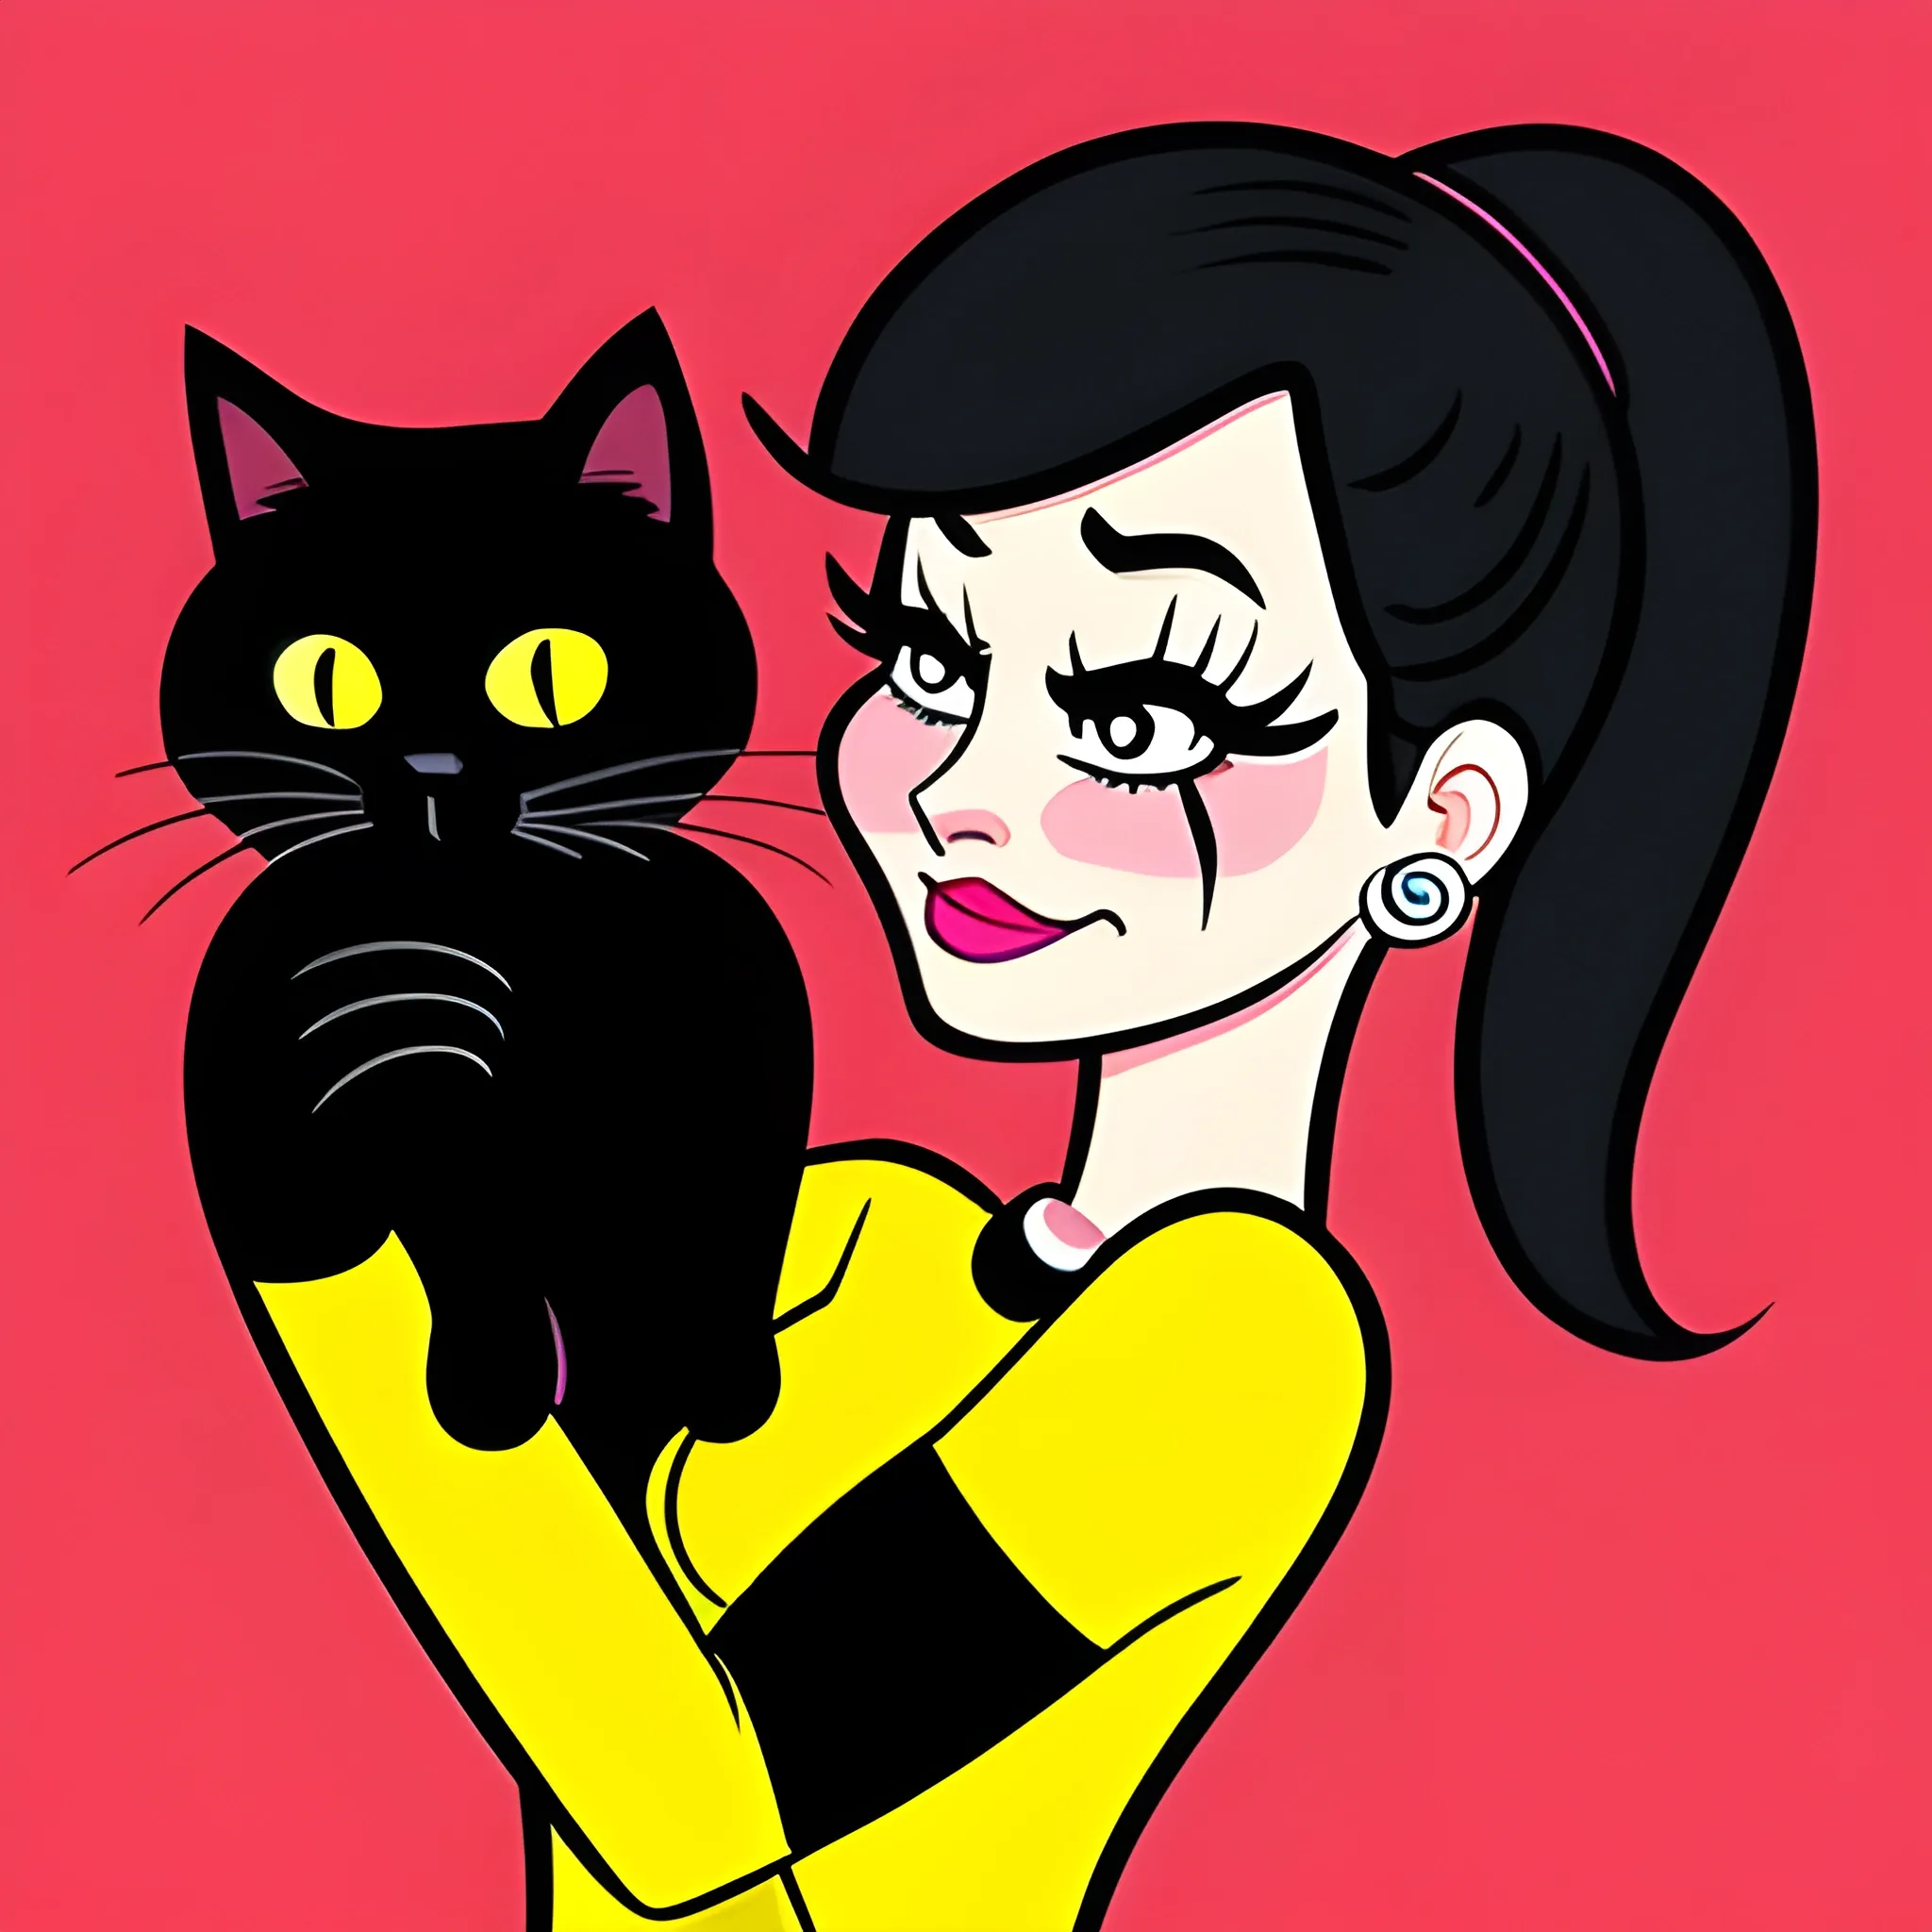 Girl with black cat is attractive, curious, cartoon funny style ...